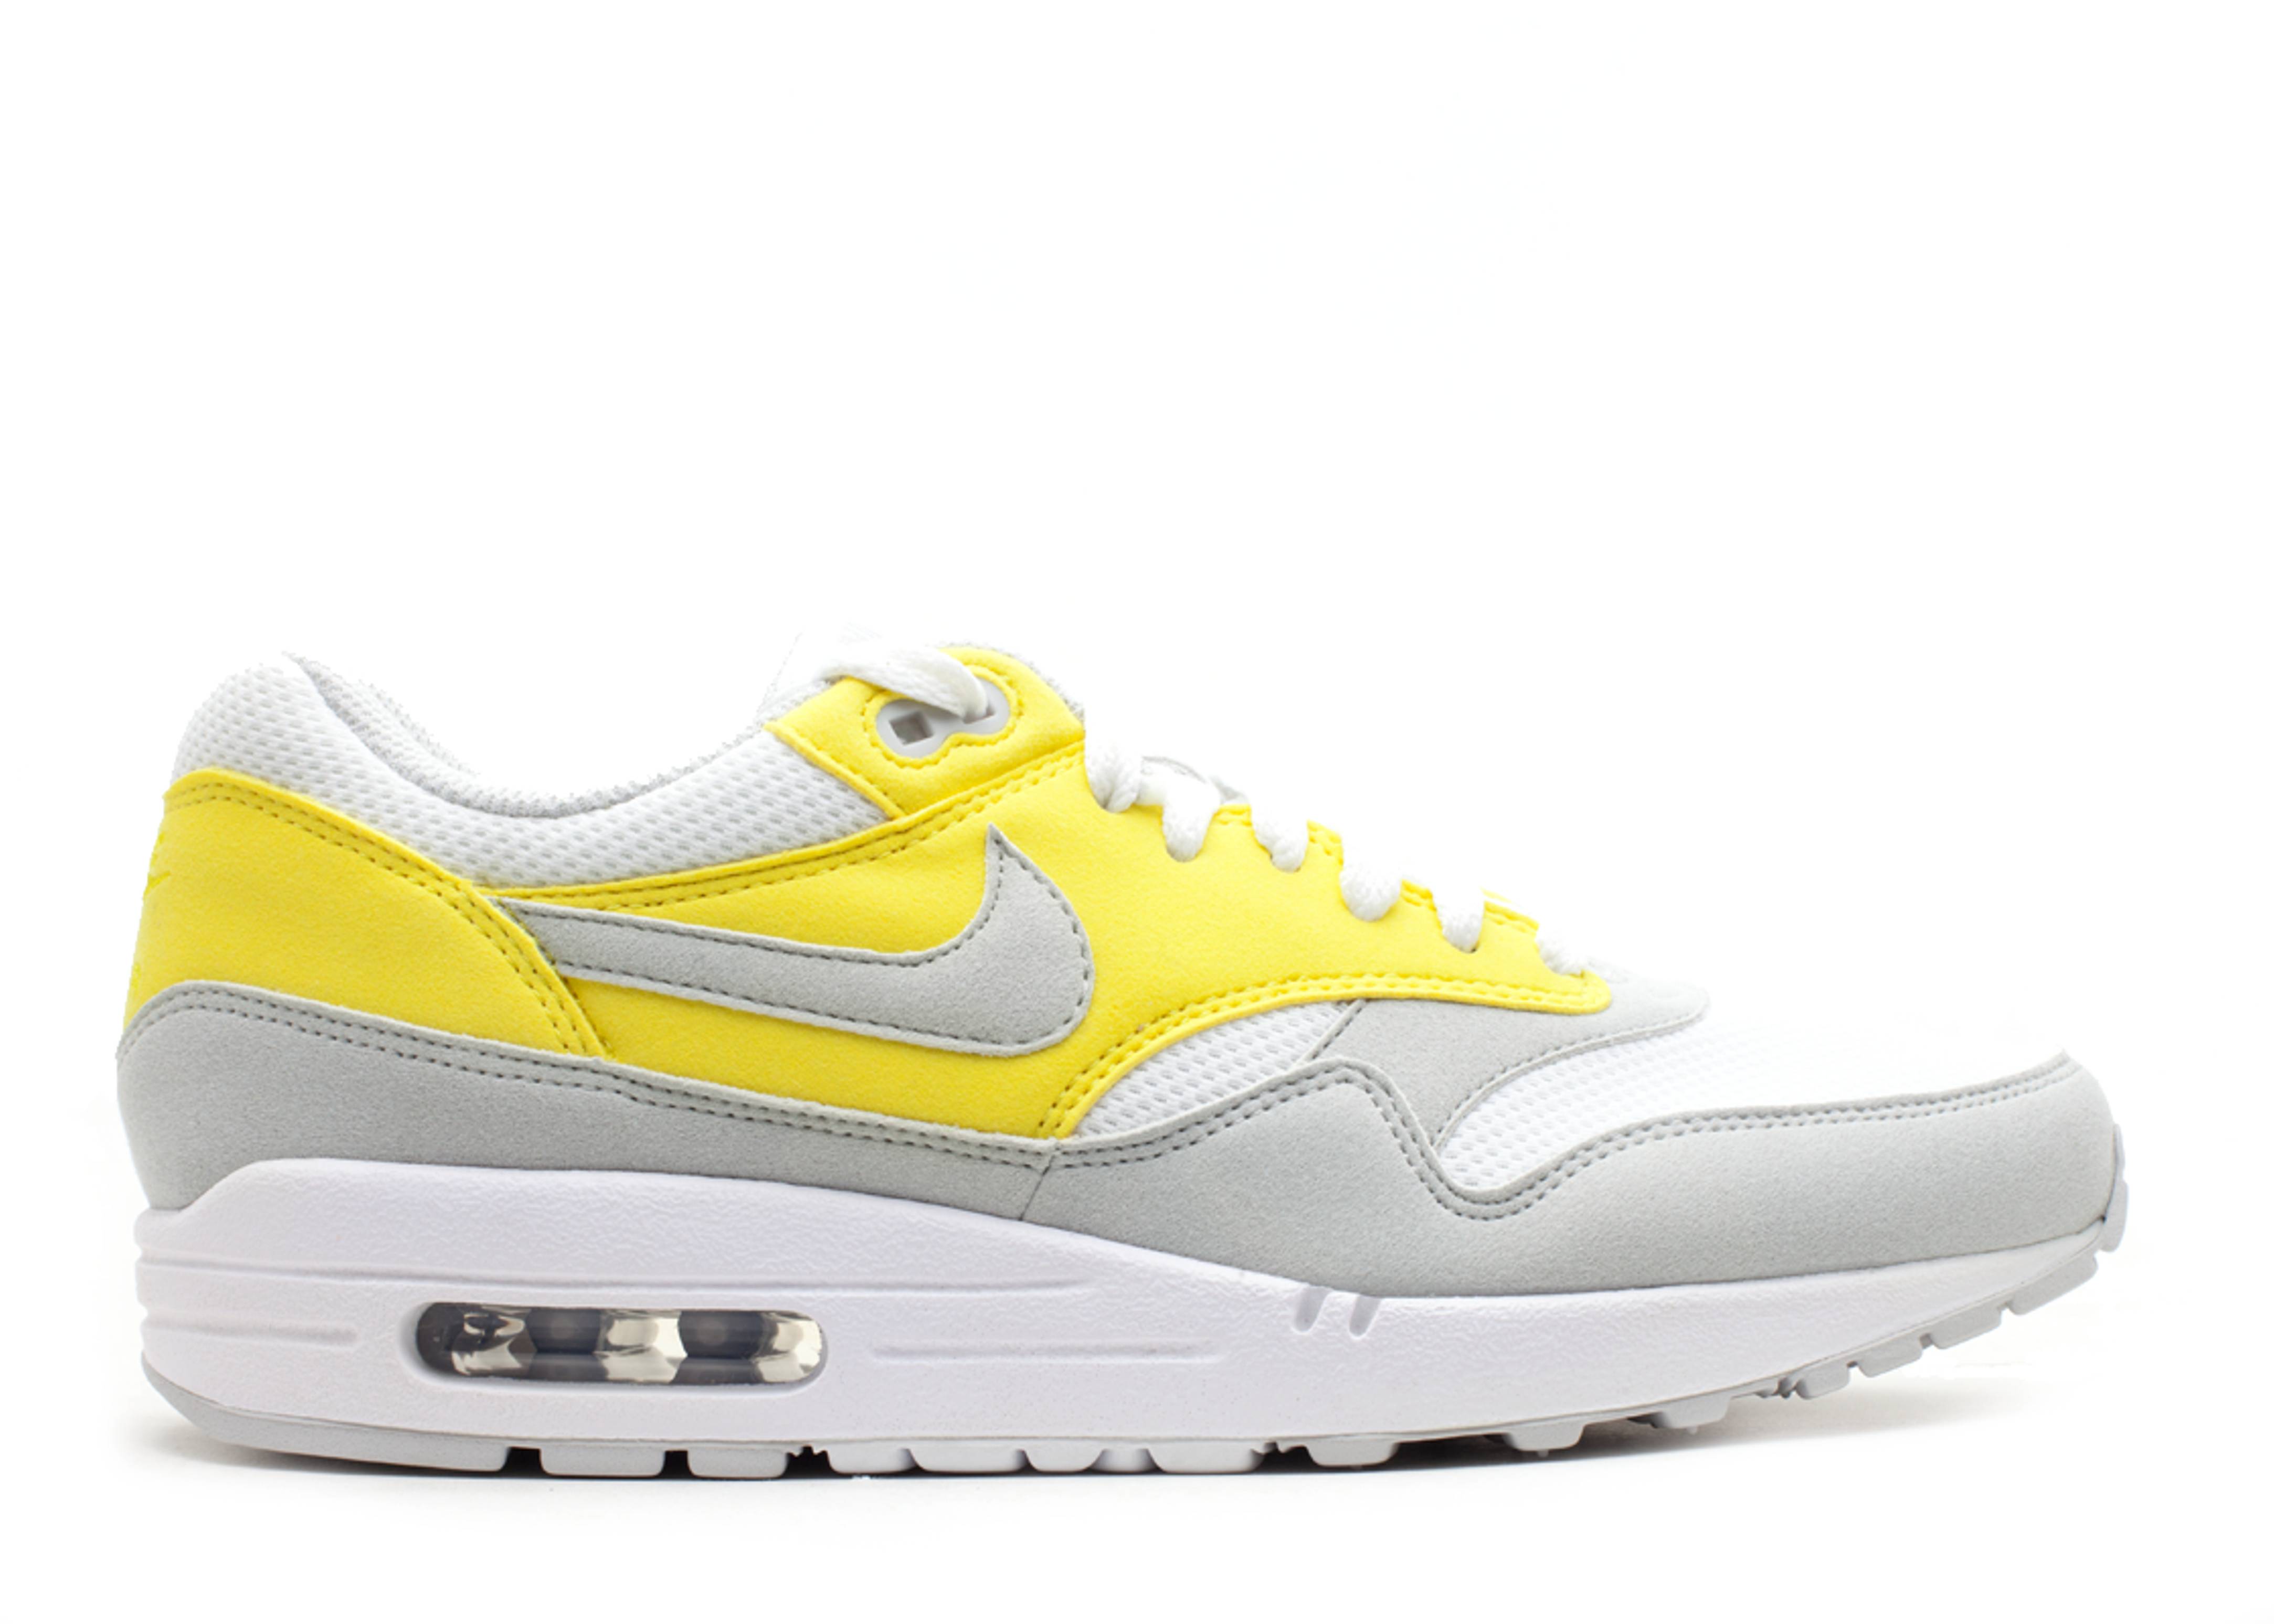 Air Max 1 'Vibrant Yellow' Asia Exclusive